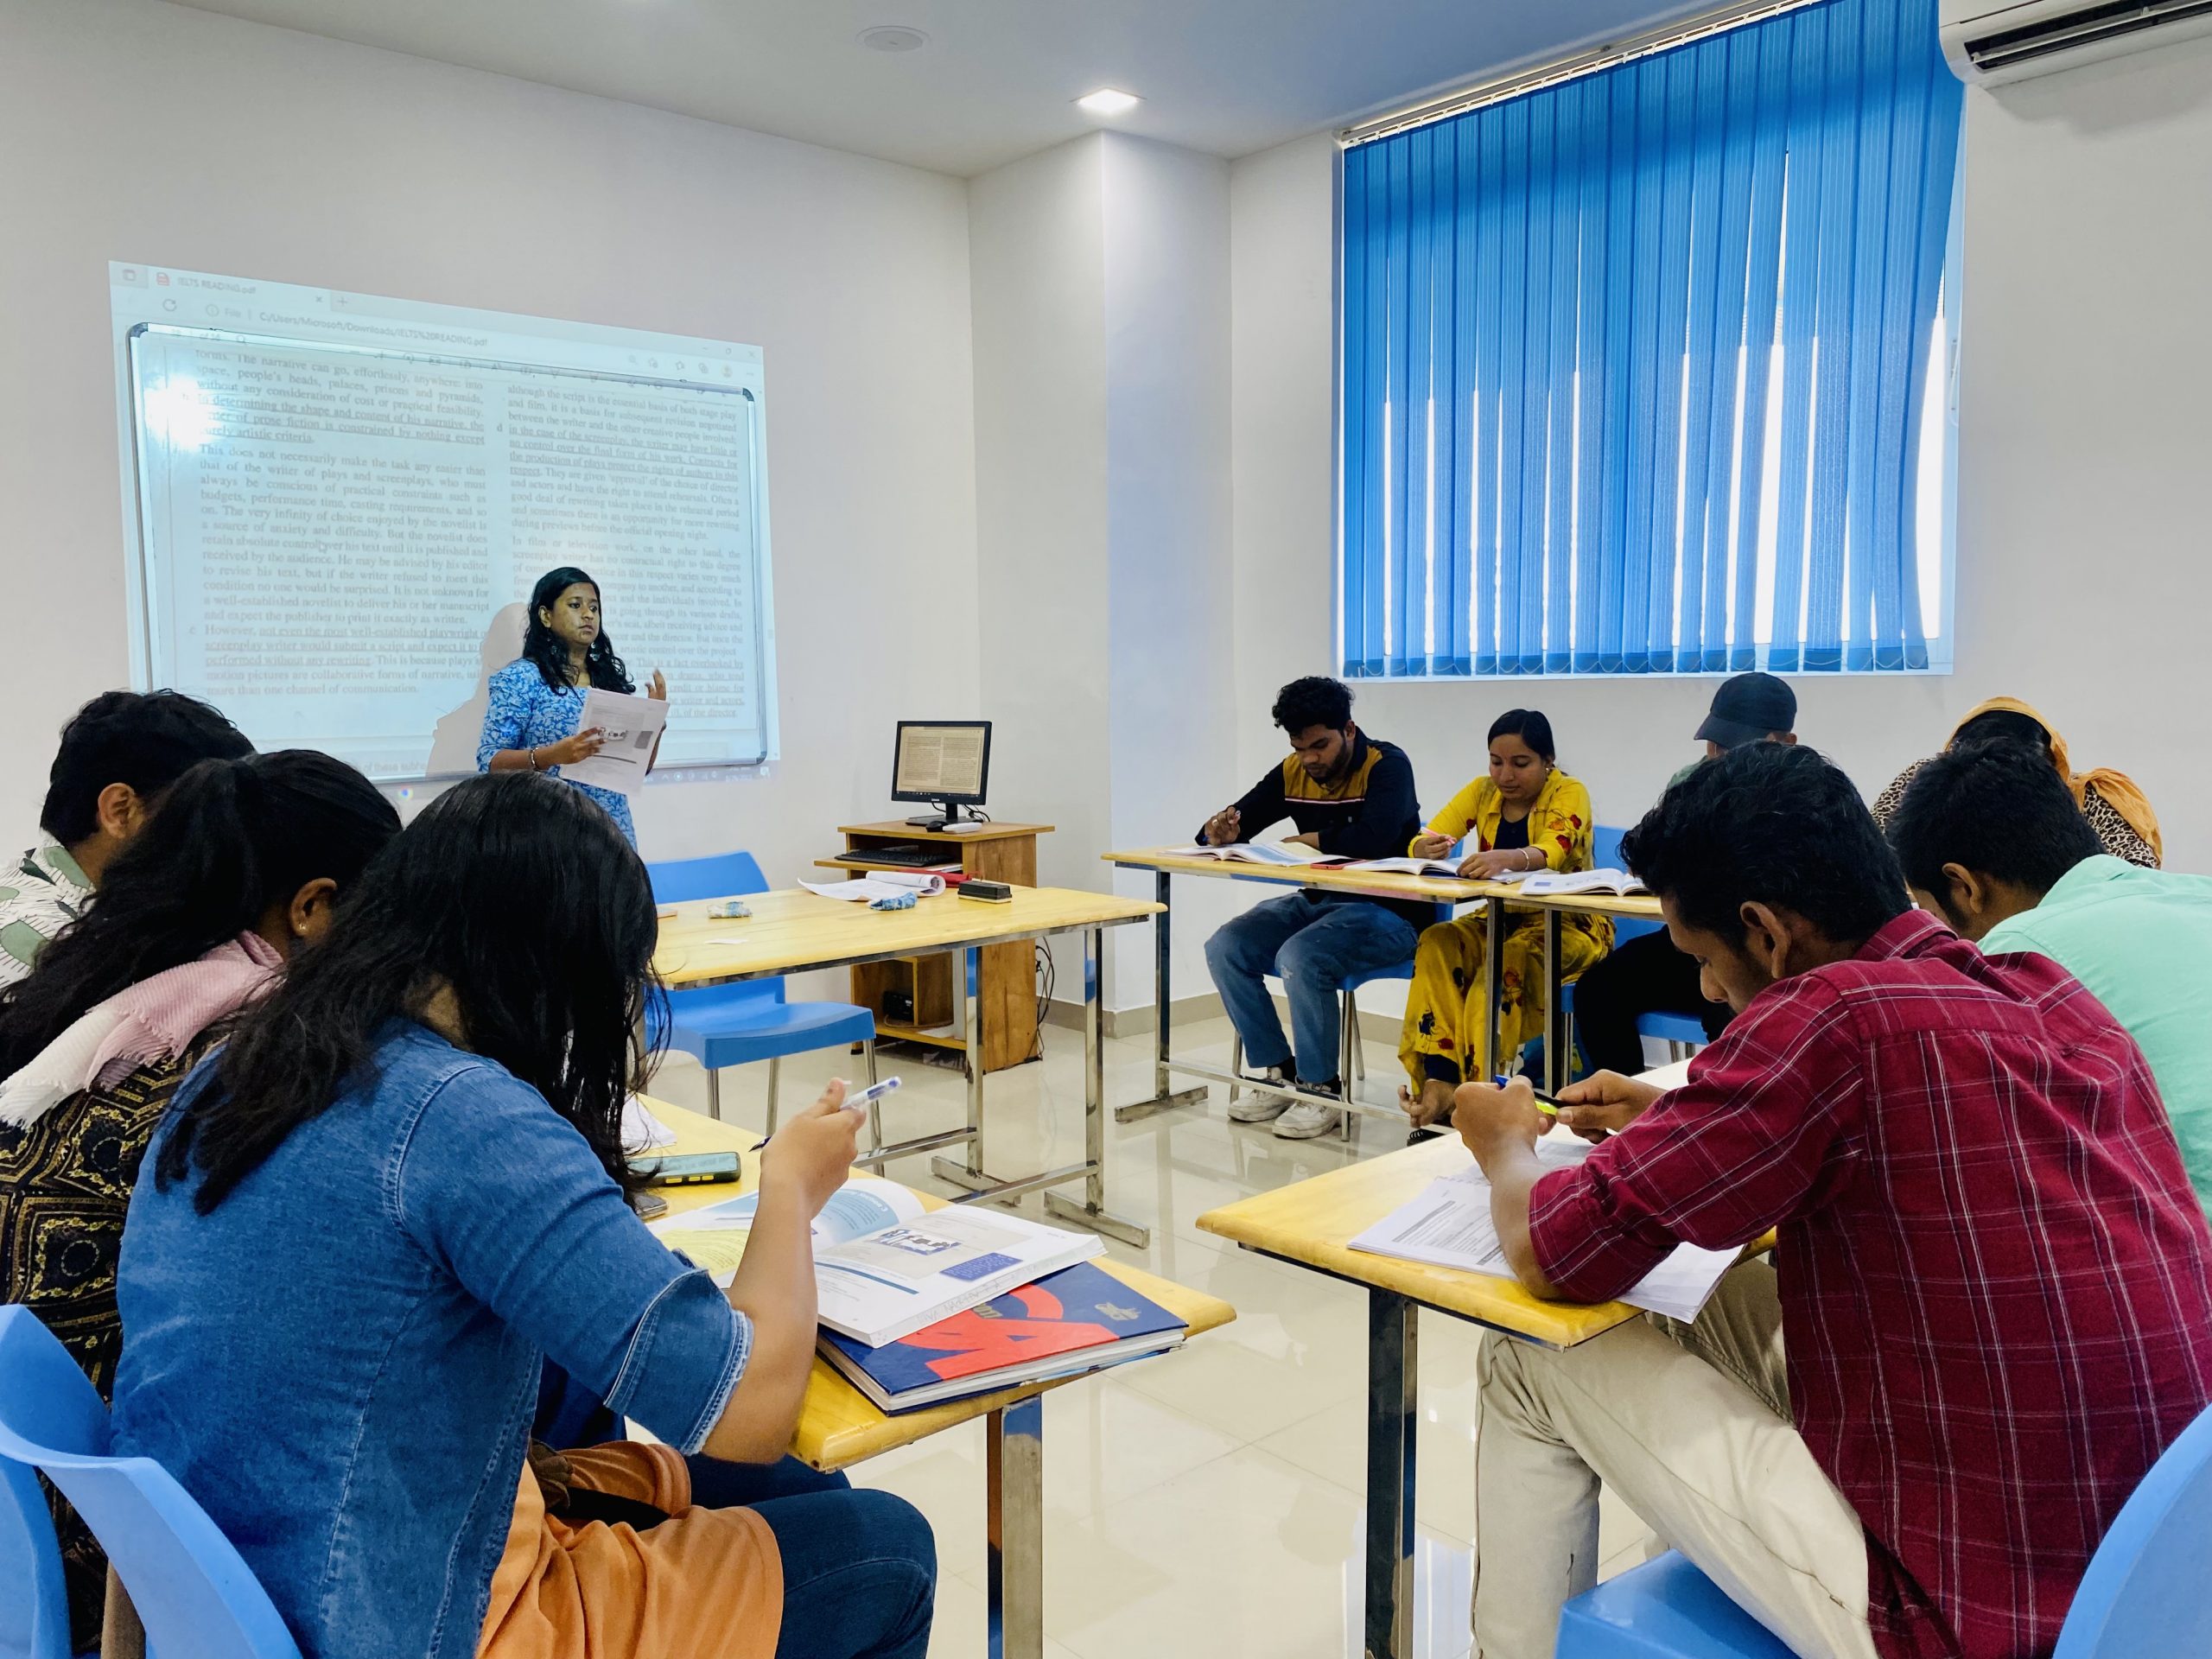 A photo of LearninGuru class room showing a group of students in an IELTS coaching class, with a teacher explaining a concept on a whiteboard.